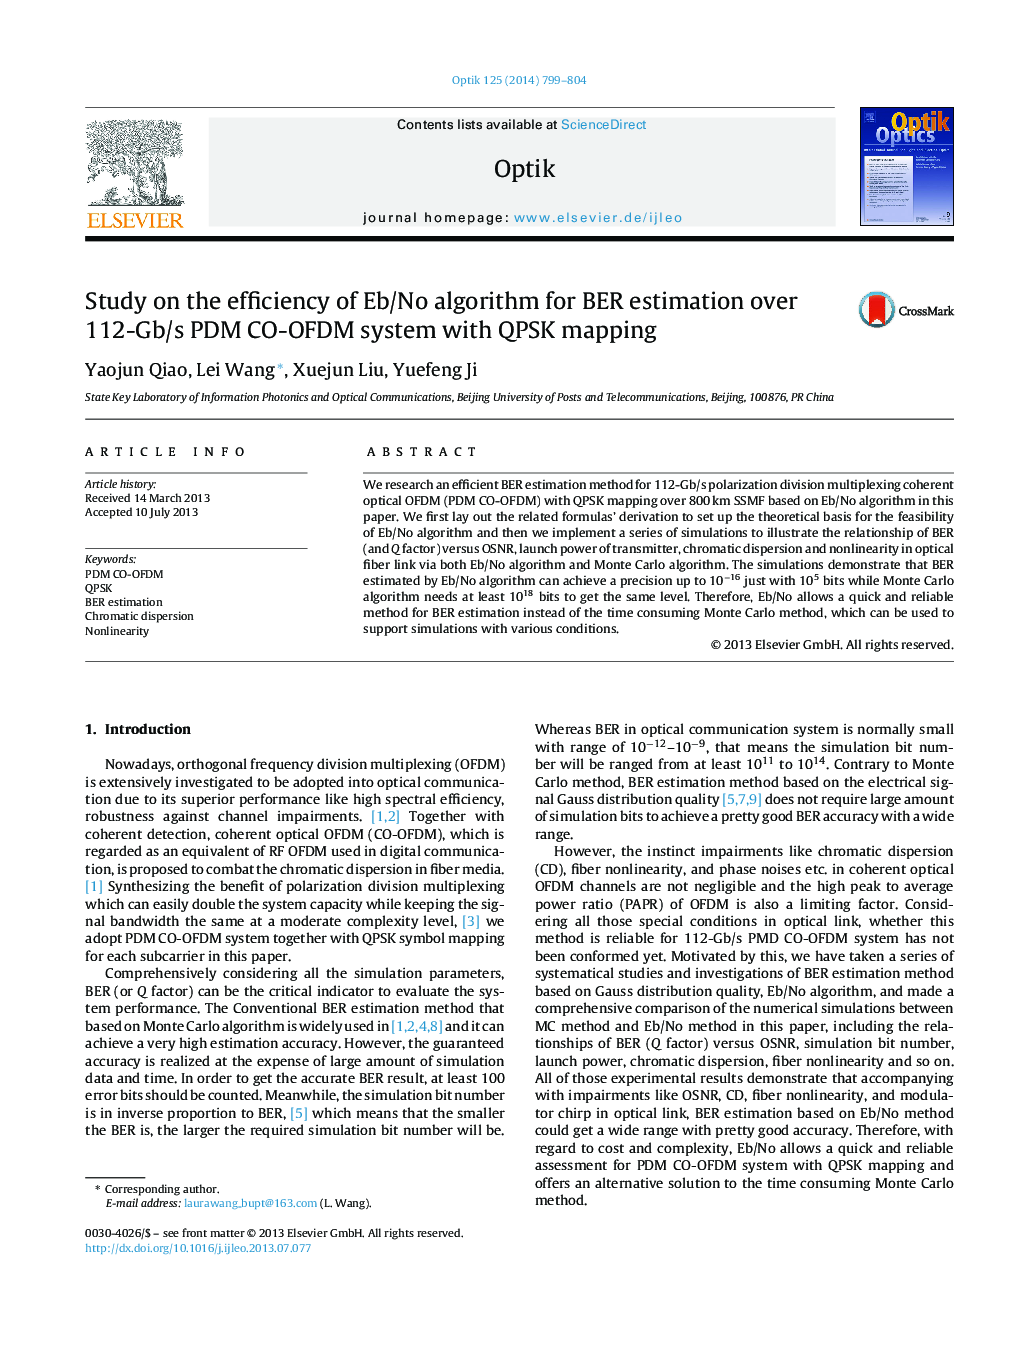 Study on the efficiency of Eb/No algorithm for BER estimation over 112-Gb/s PDM CO-OFDM system with QPSK mapping